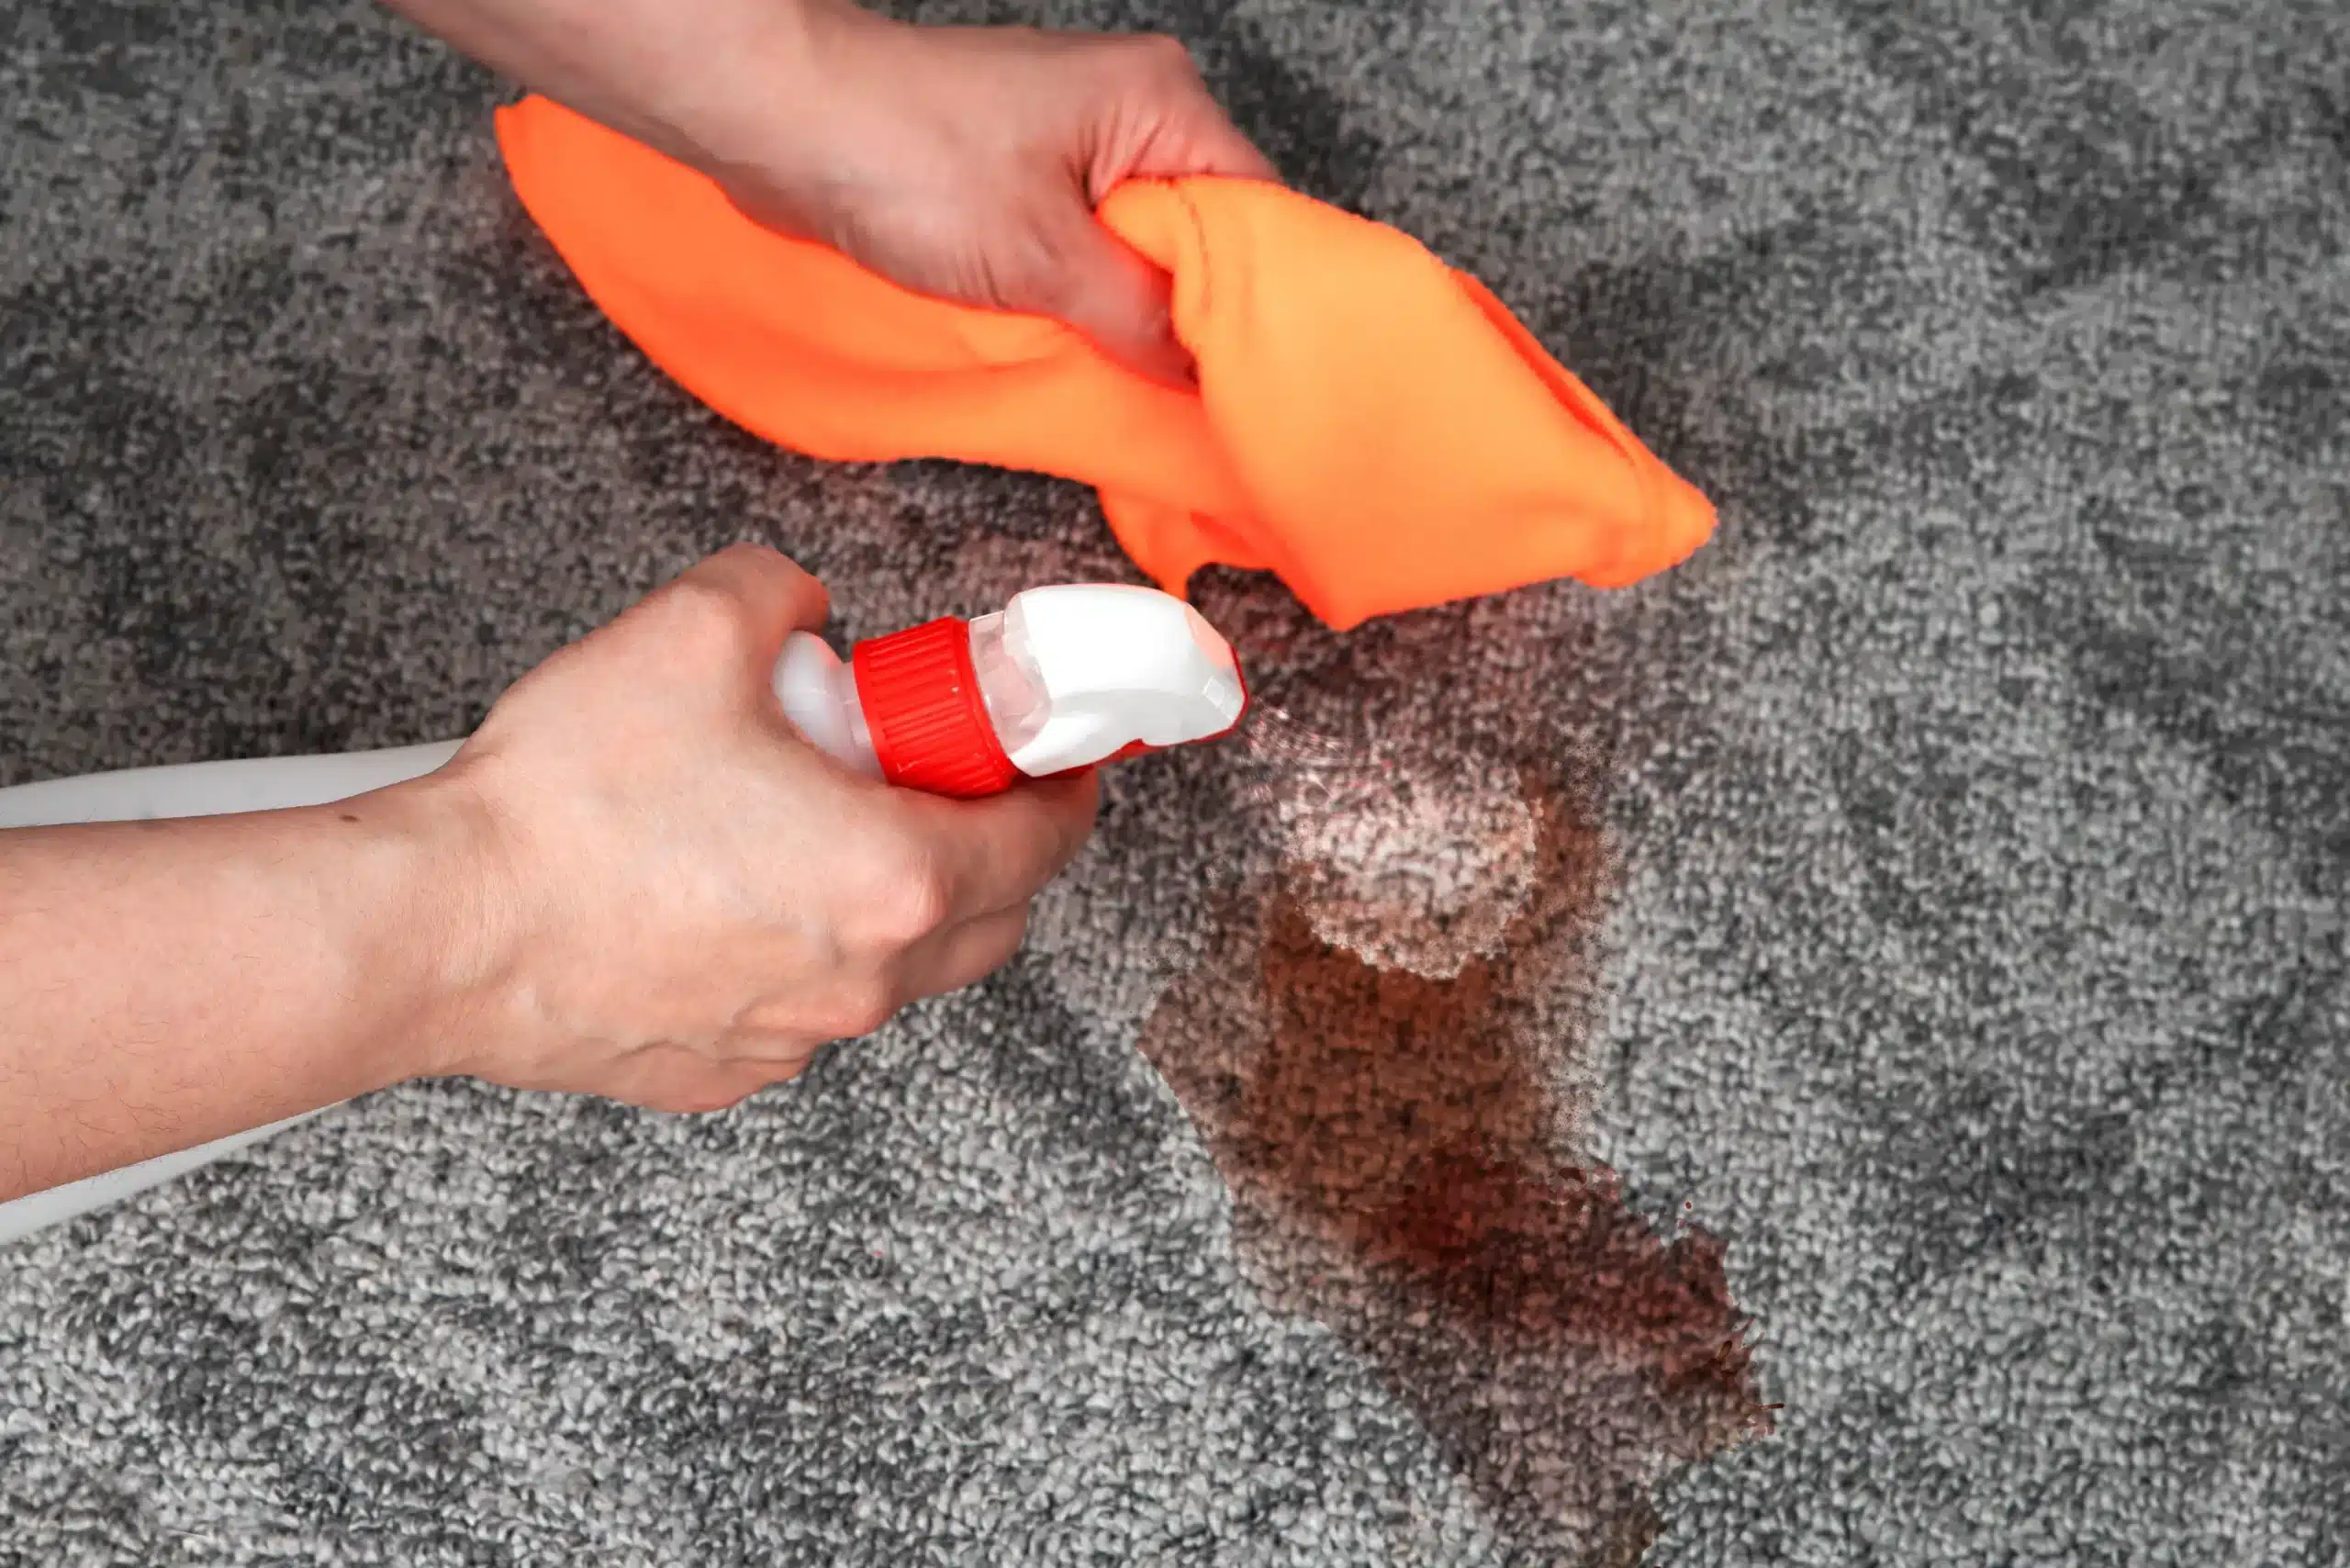 How to Clean Grease From Carpet